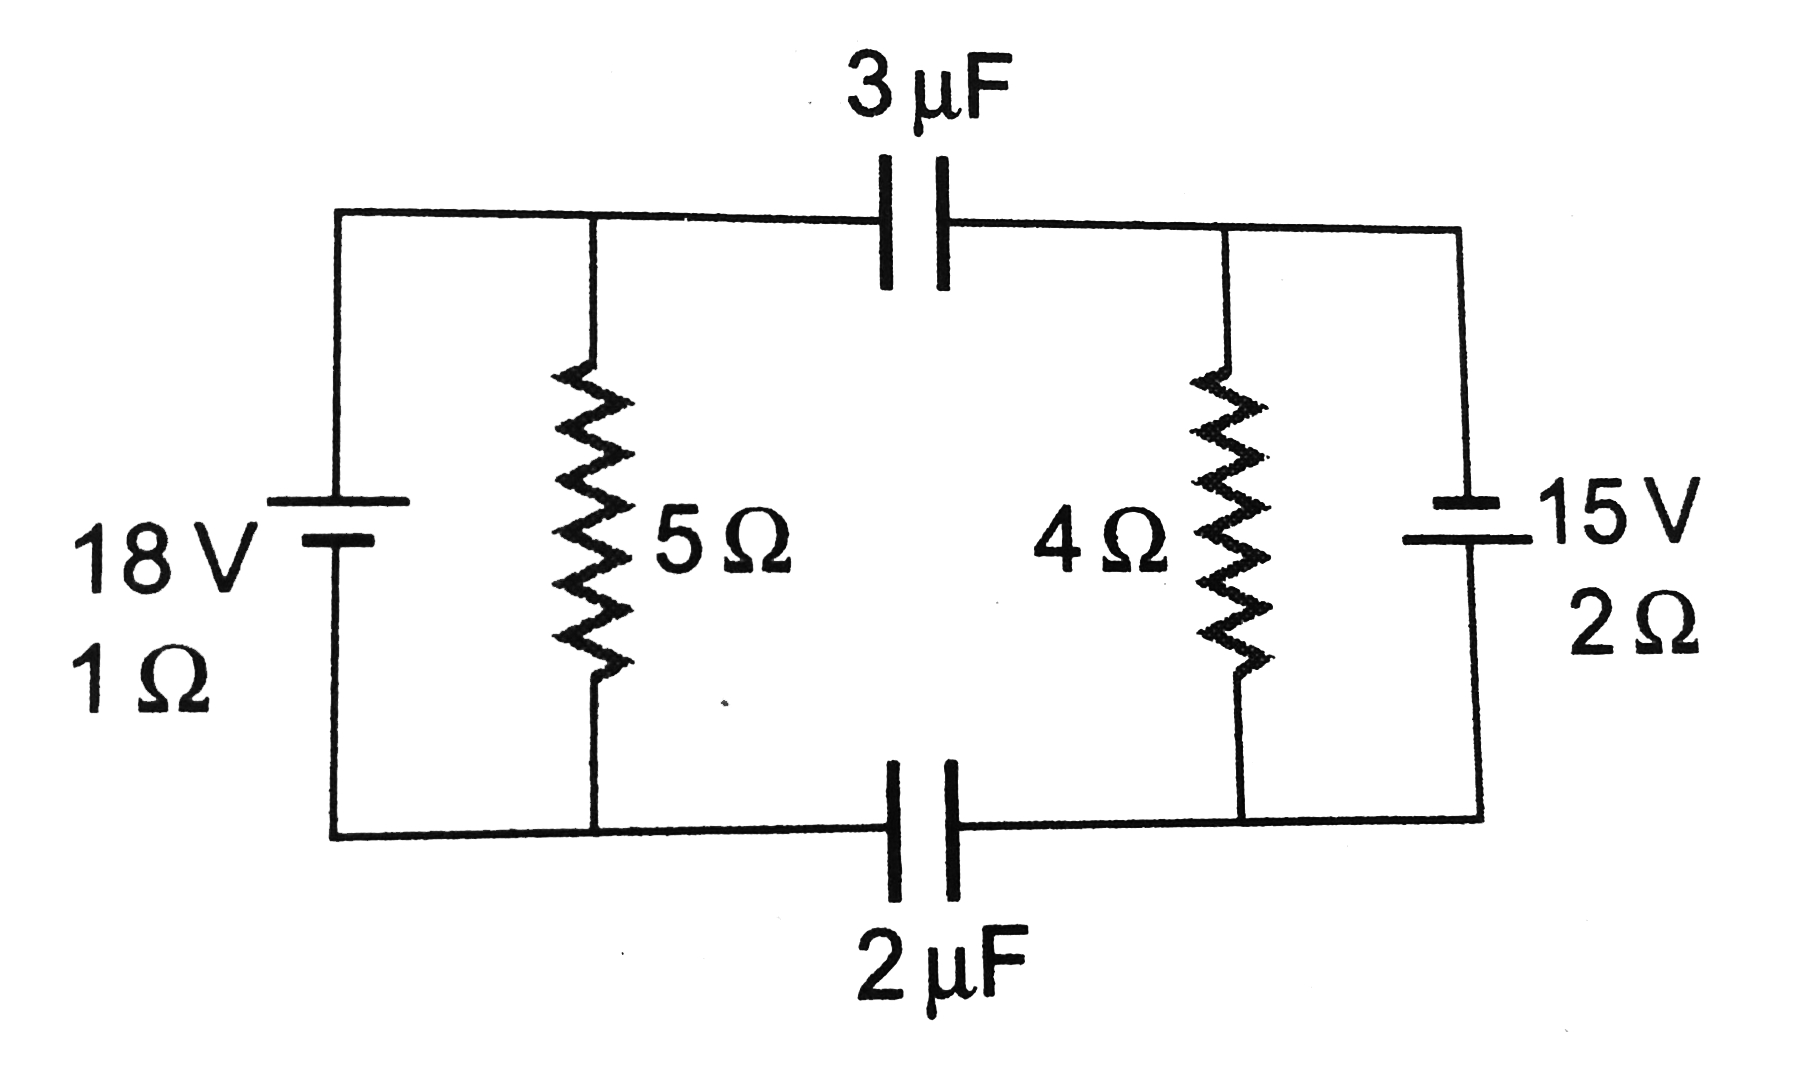 Two cellls, two resistance and two capacitors are connected as shown in figure. The charge on 2muF capacitors is